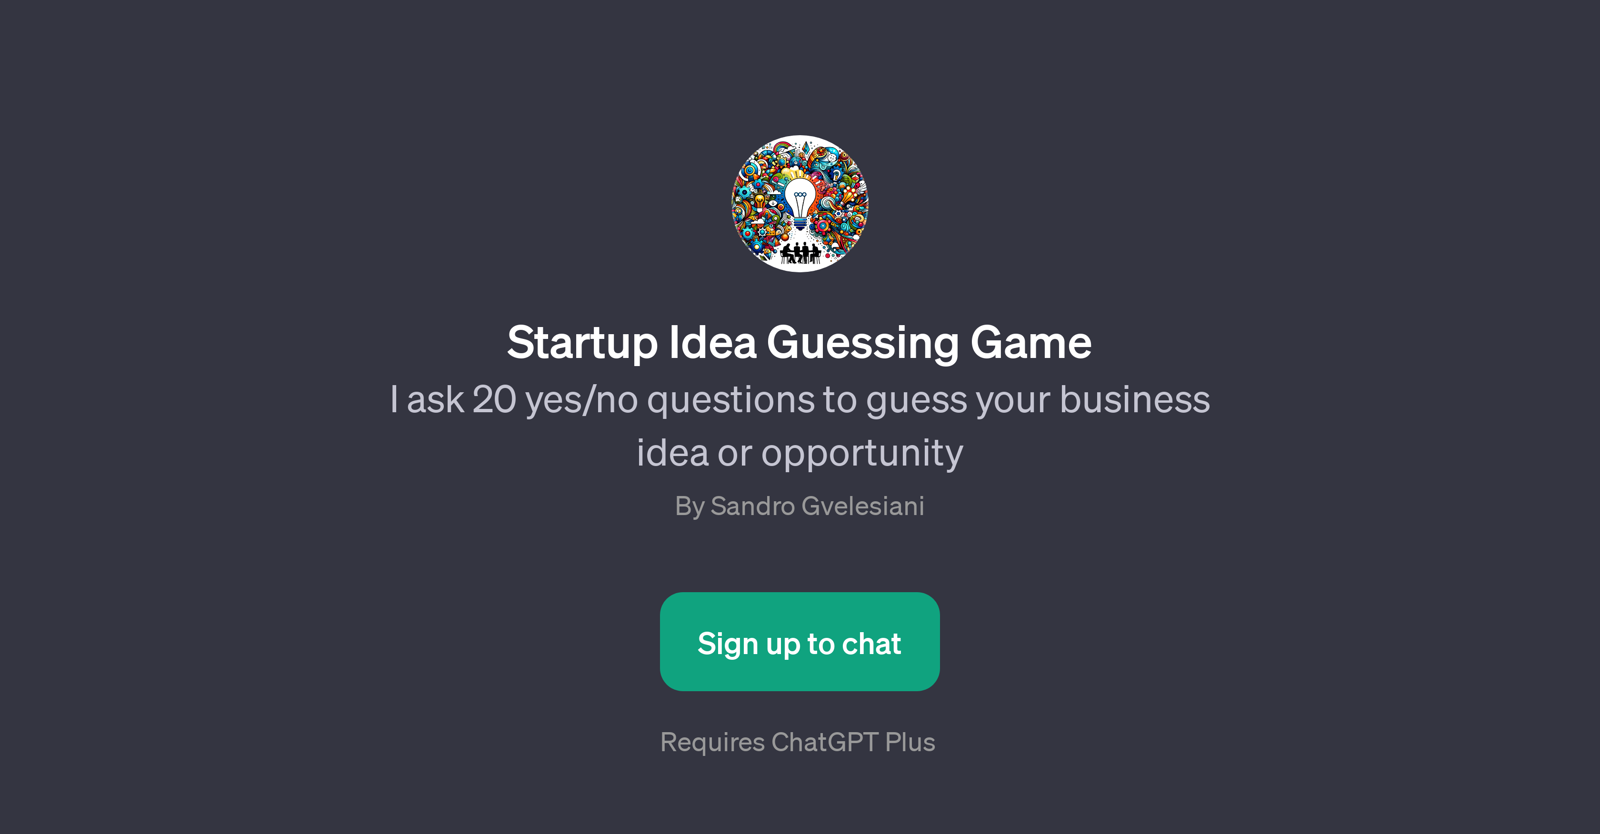 Startup Idea Guessing Game website